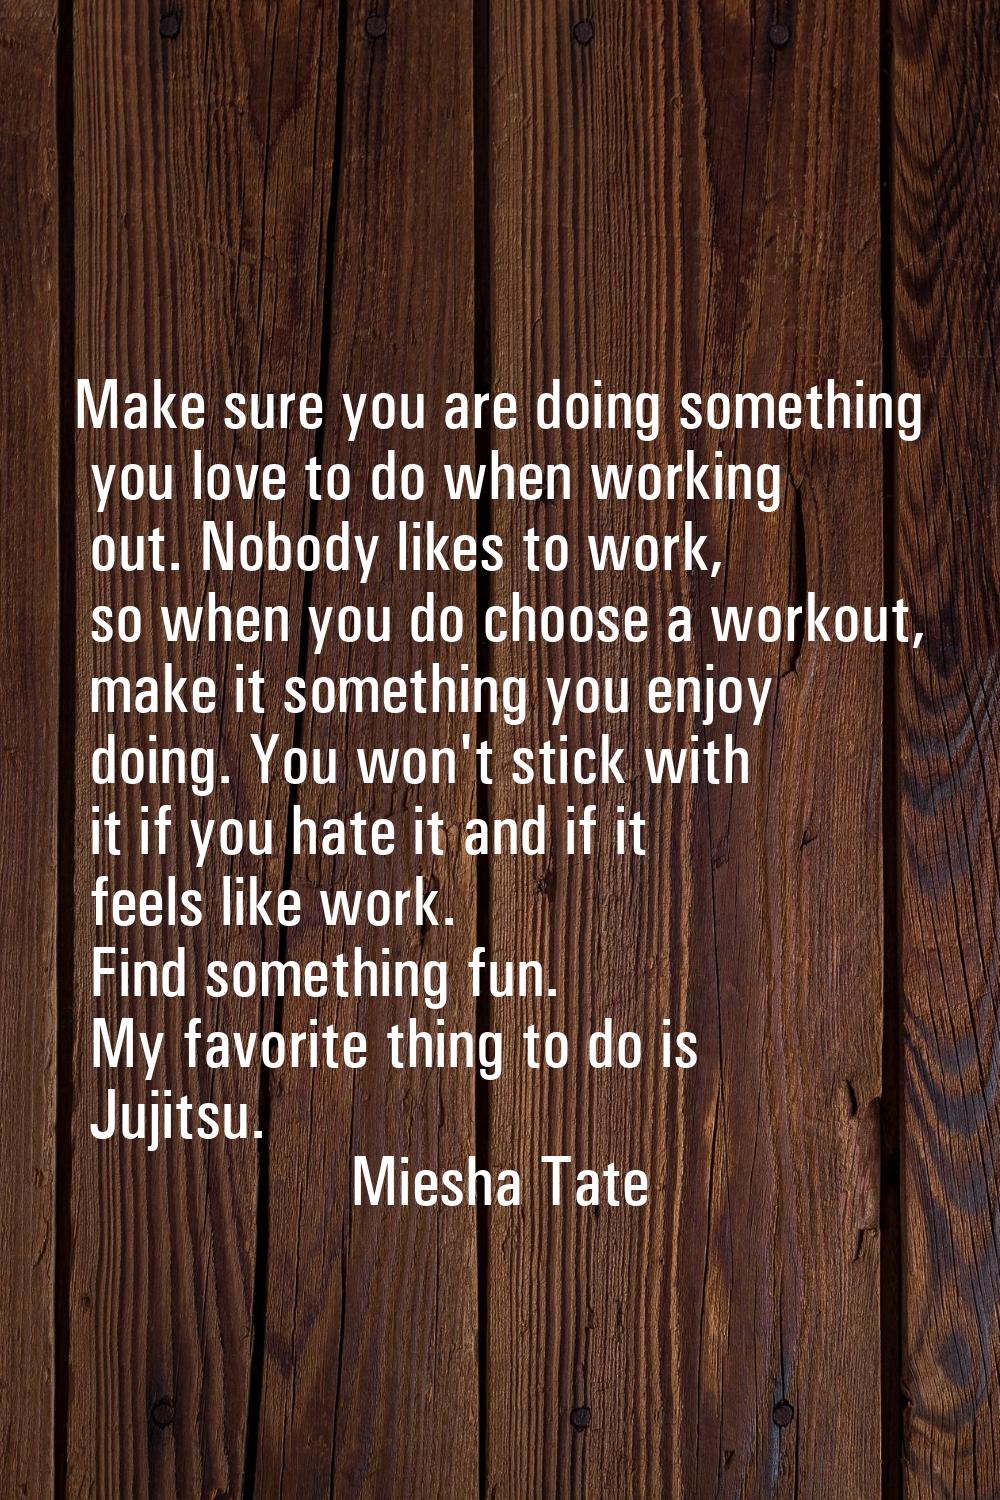 Make sure you are doing something you love to do when working out. Nobody likes to work, so when yo